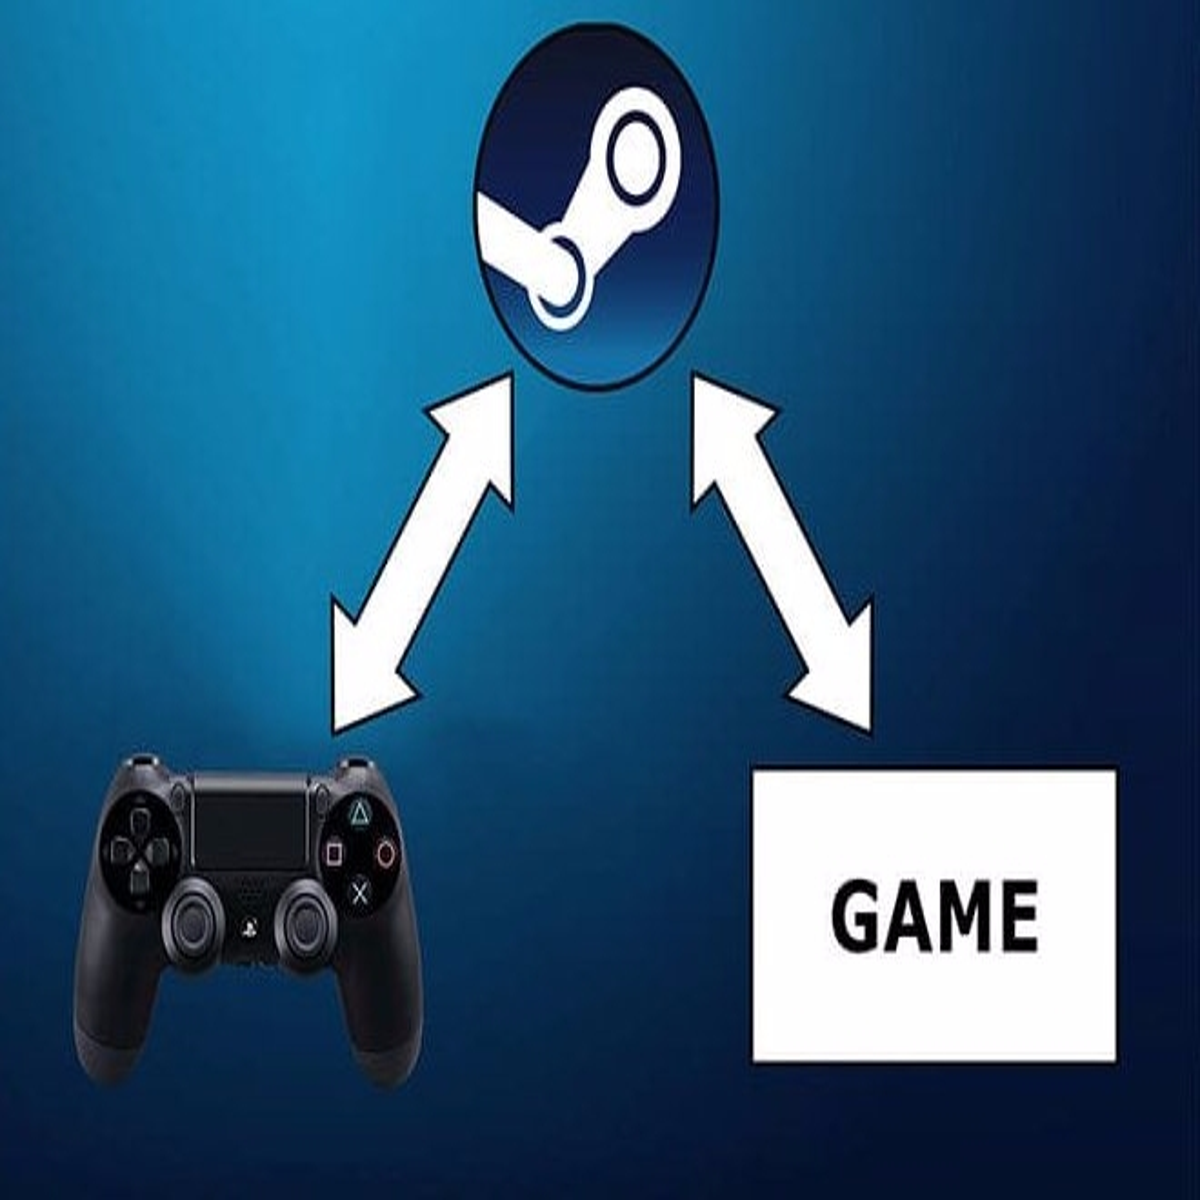 How to use a PS4 controller on Steam